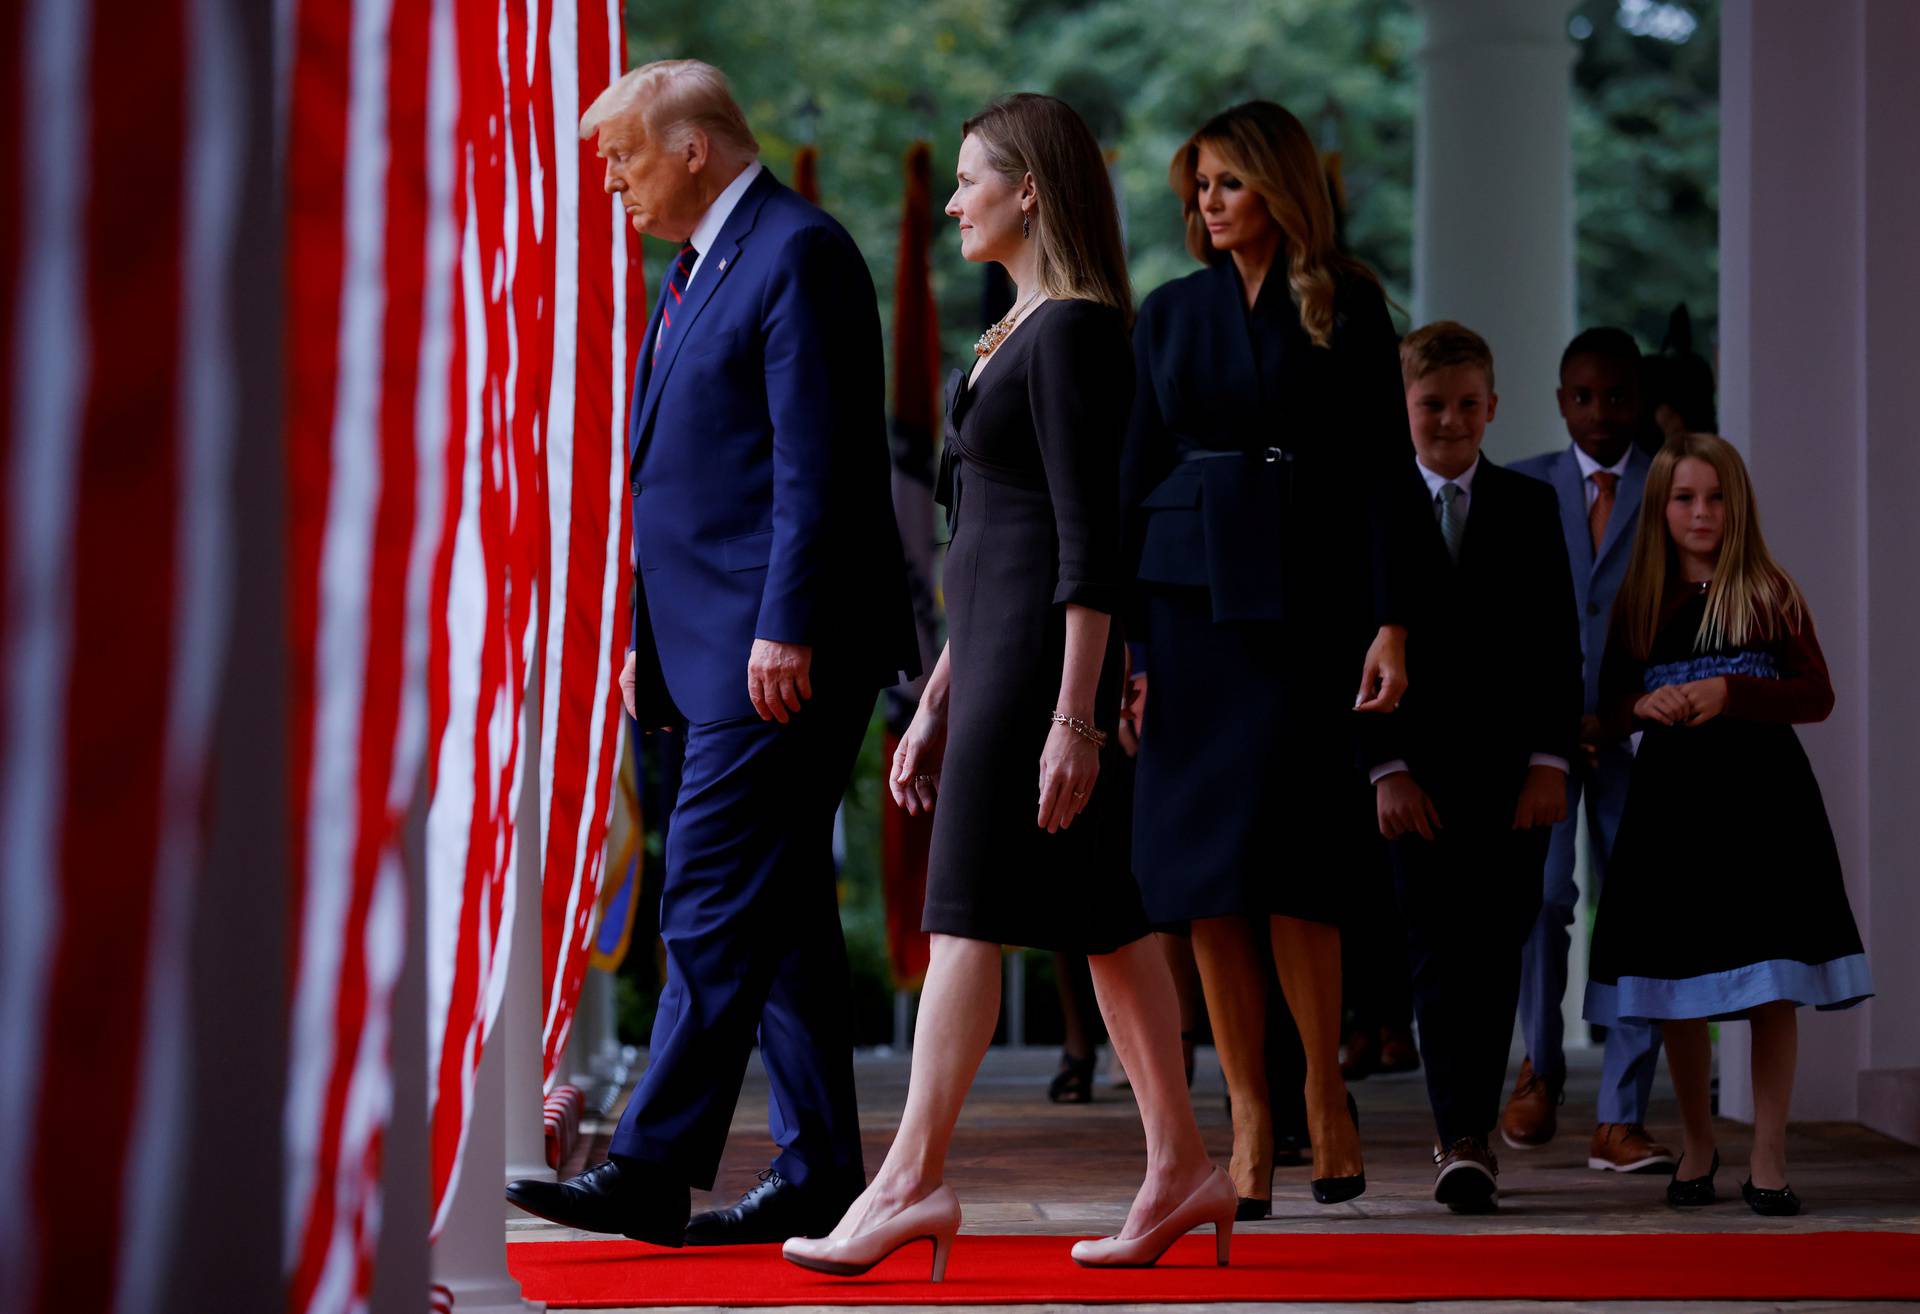 U.S President Donald Trump holds an event to announce his nominee of U.S. Court of Appeals for the Seventh Circuit Judge Amy Coney Barrett to fill the Supreme Court seat